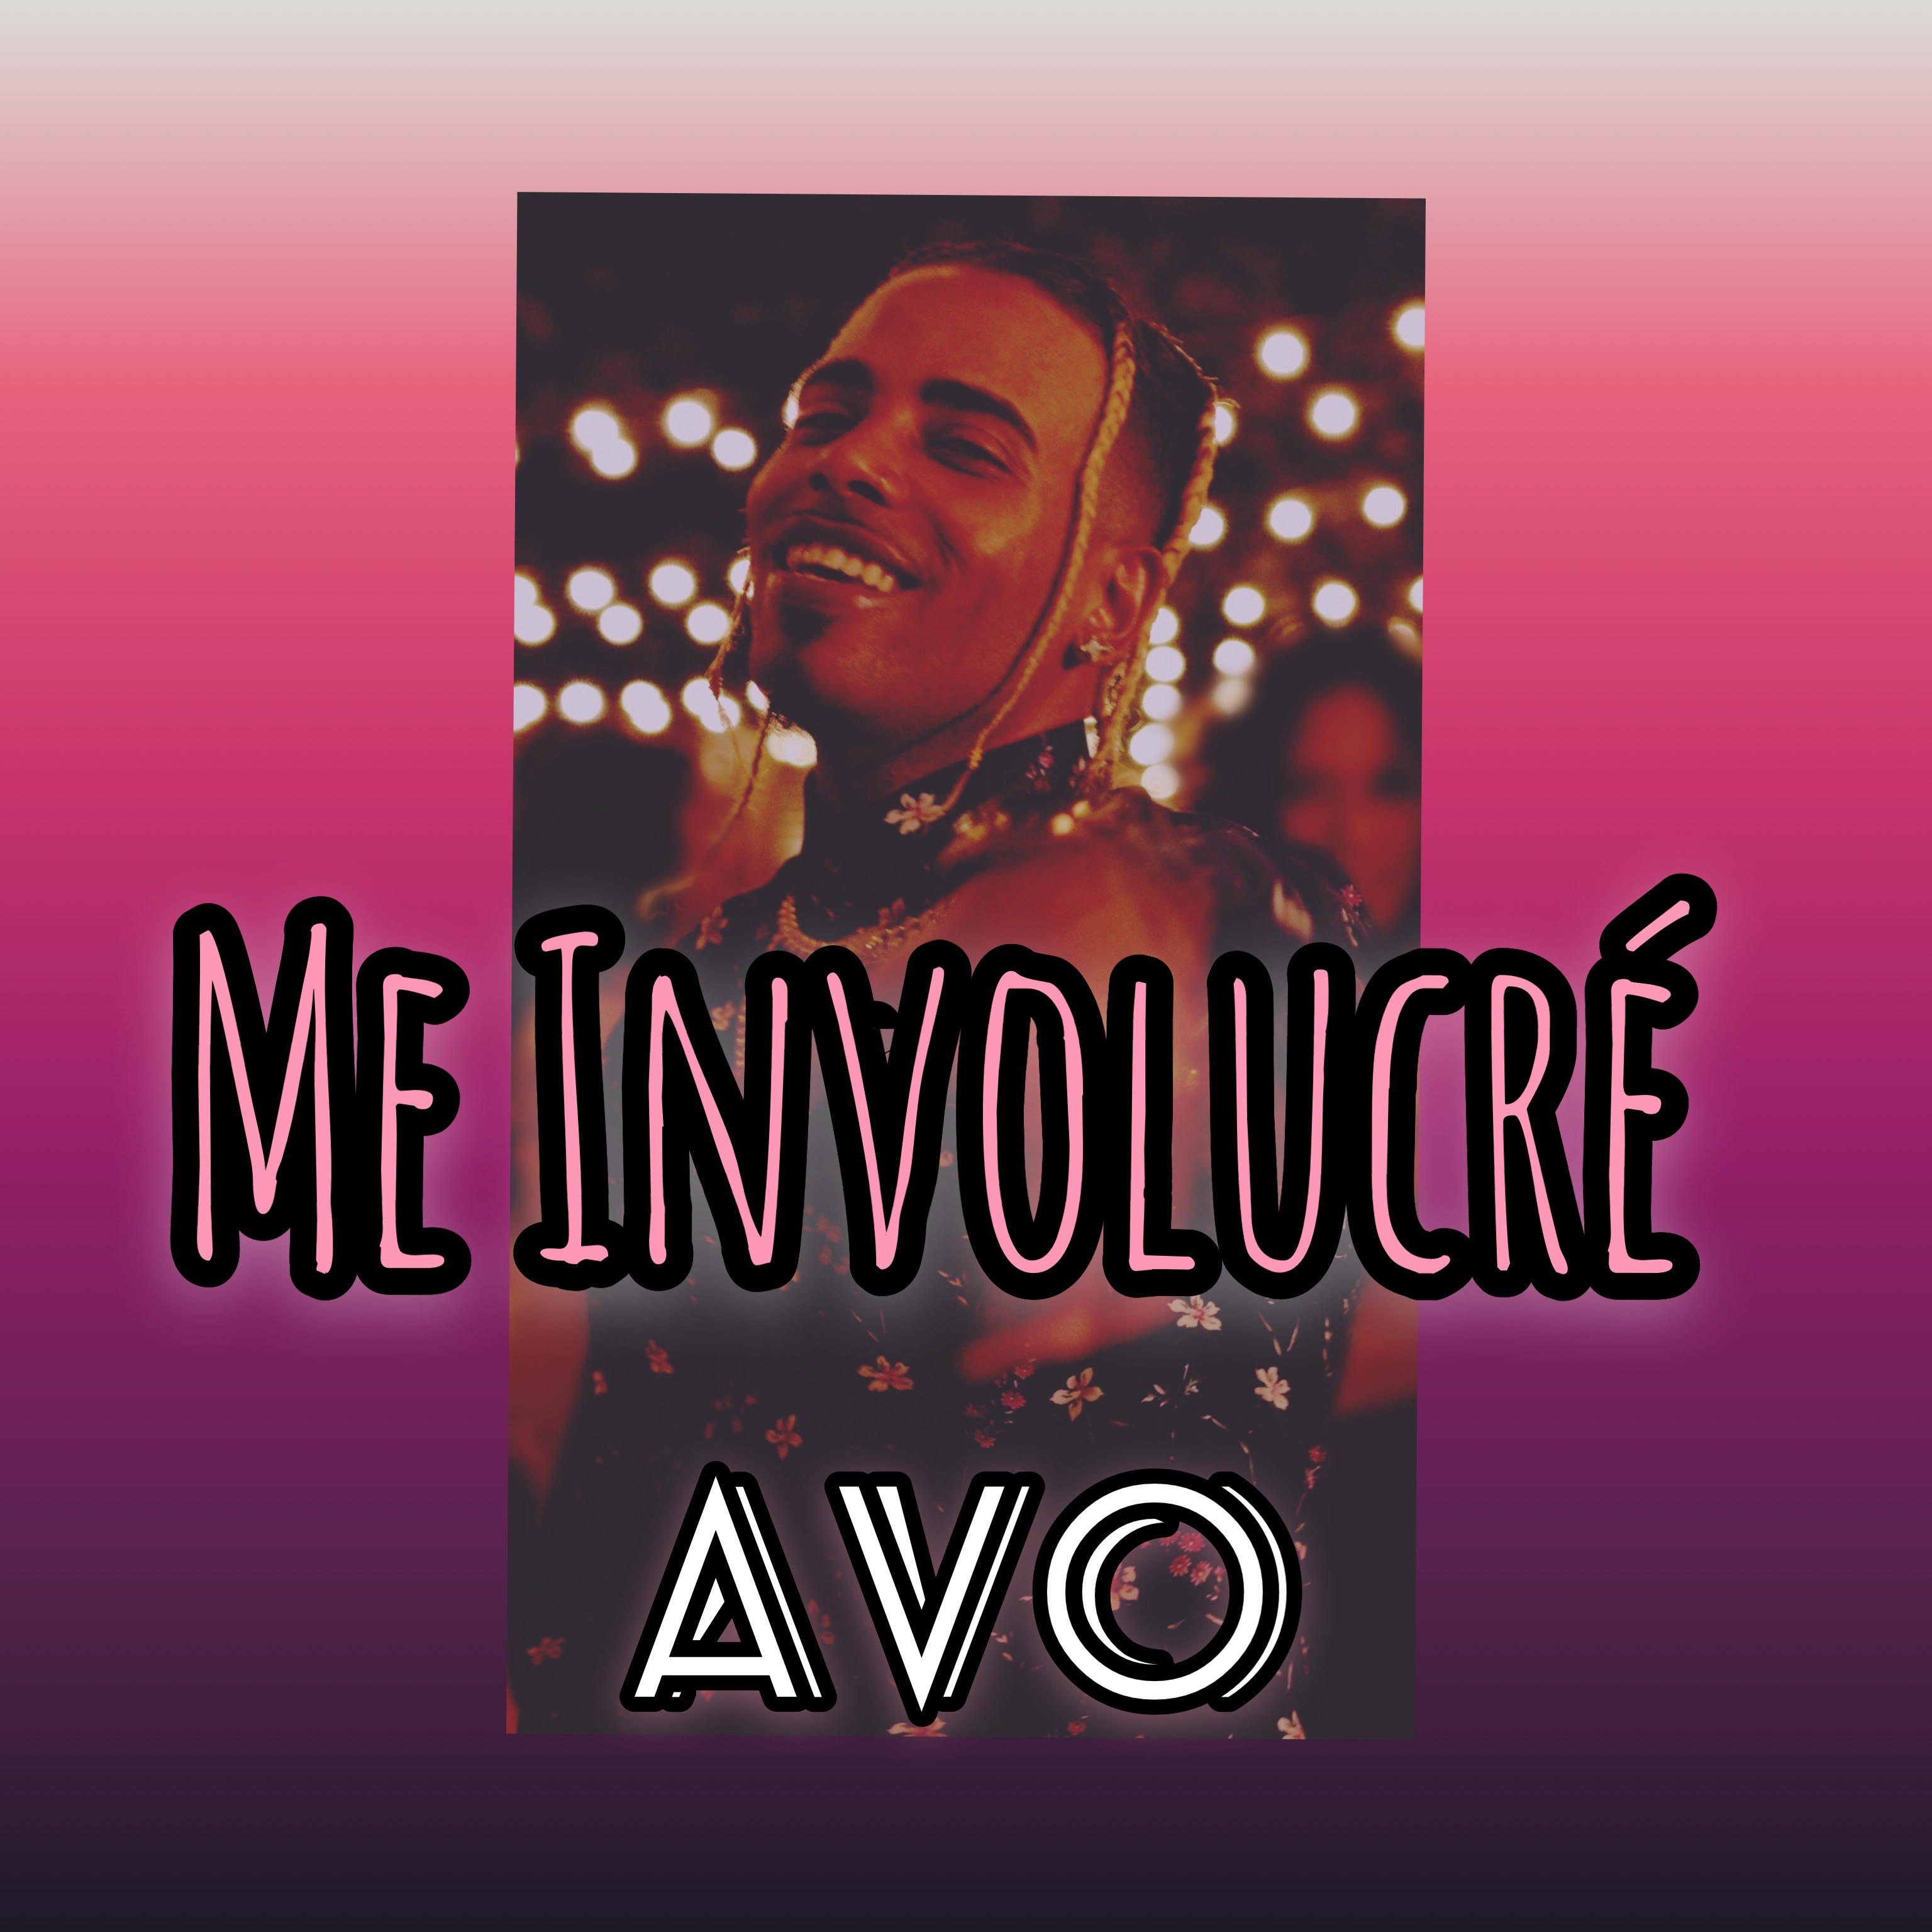 Art for Me Involucre by AVO